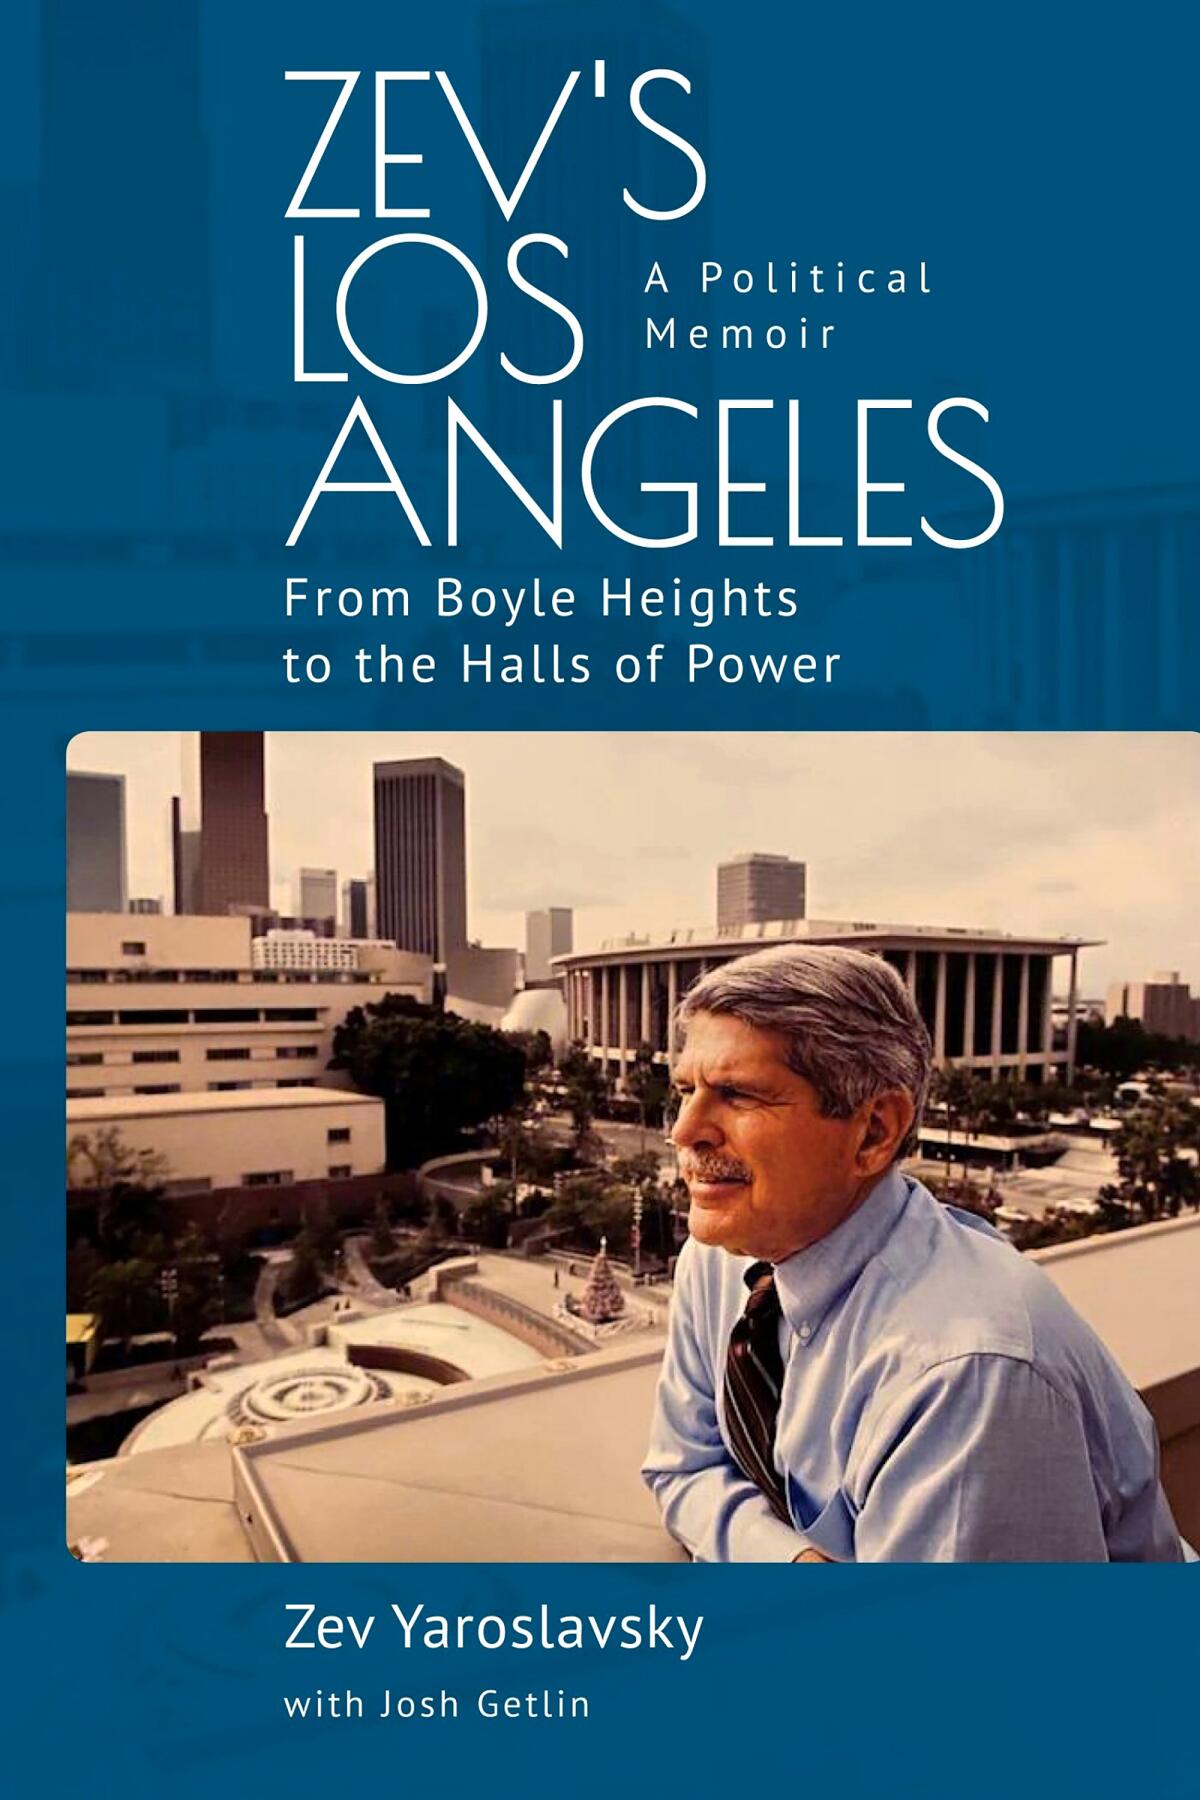 book cover for "Zev's Los Angeles: From Boyle Heights to the Halls of Power. A Political Memoir" by Zev Yaroslavsky